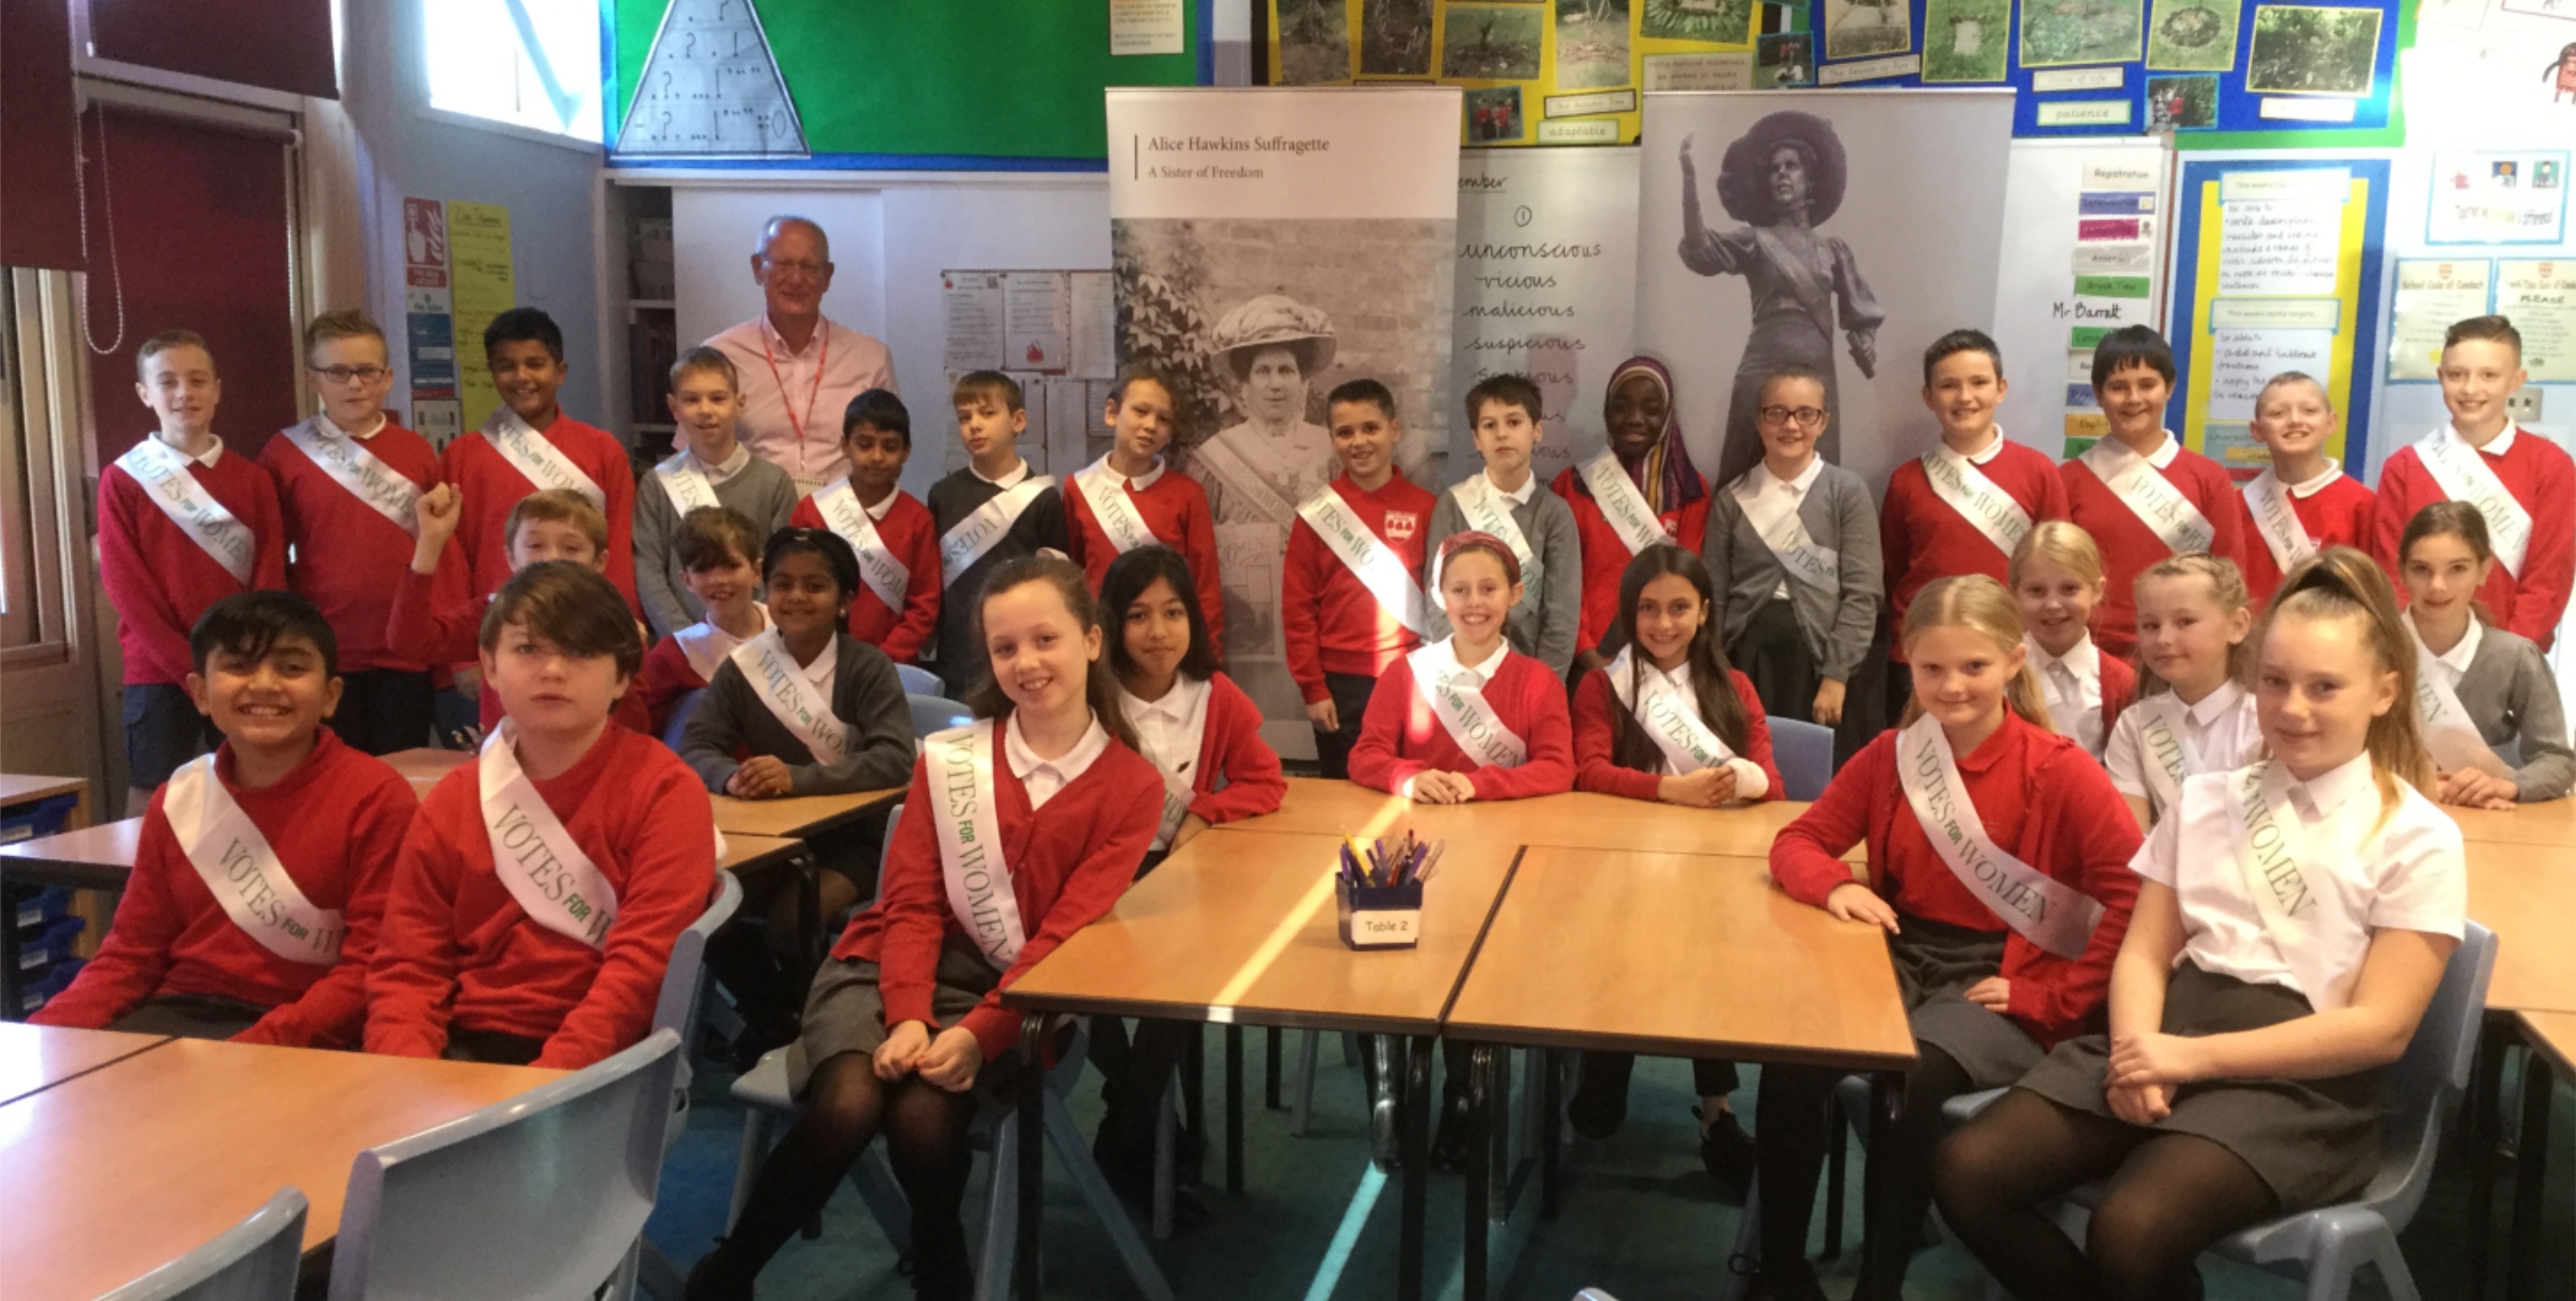 Group photo of pupils in a classroom wearing school uniform and 'votes for women' sashes